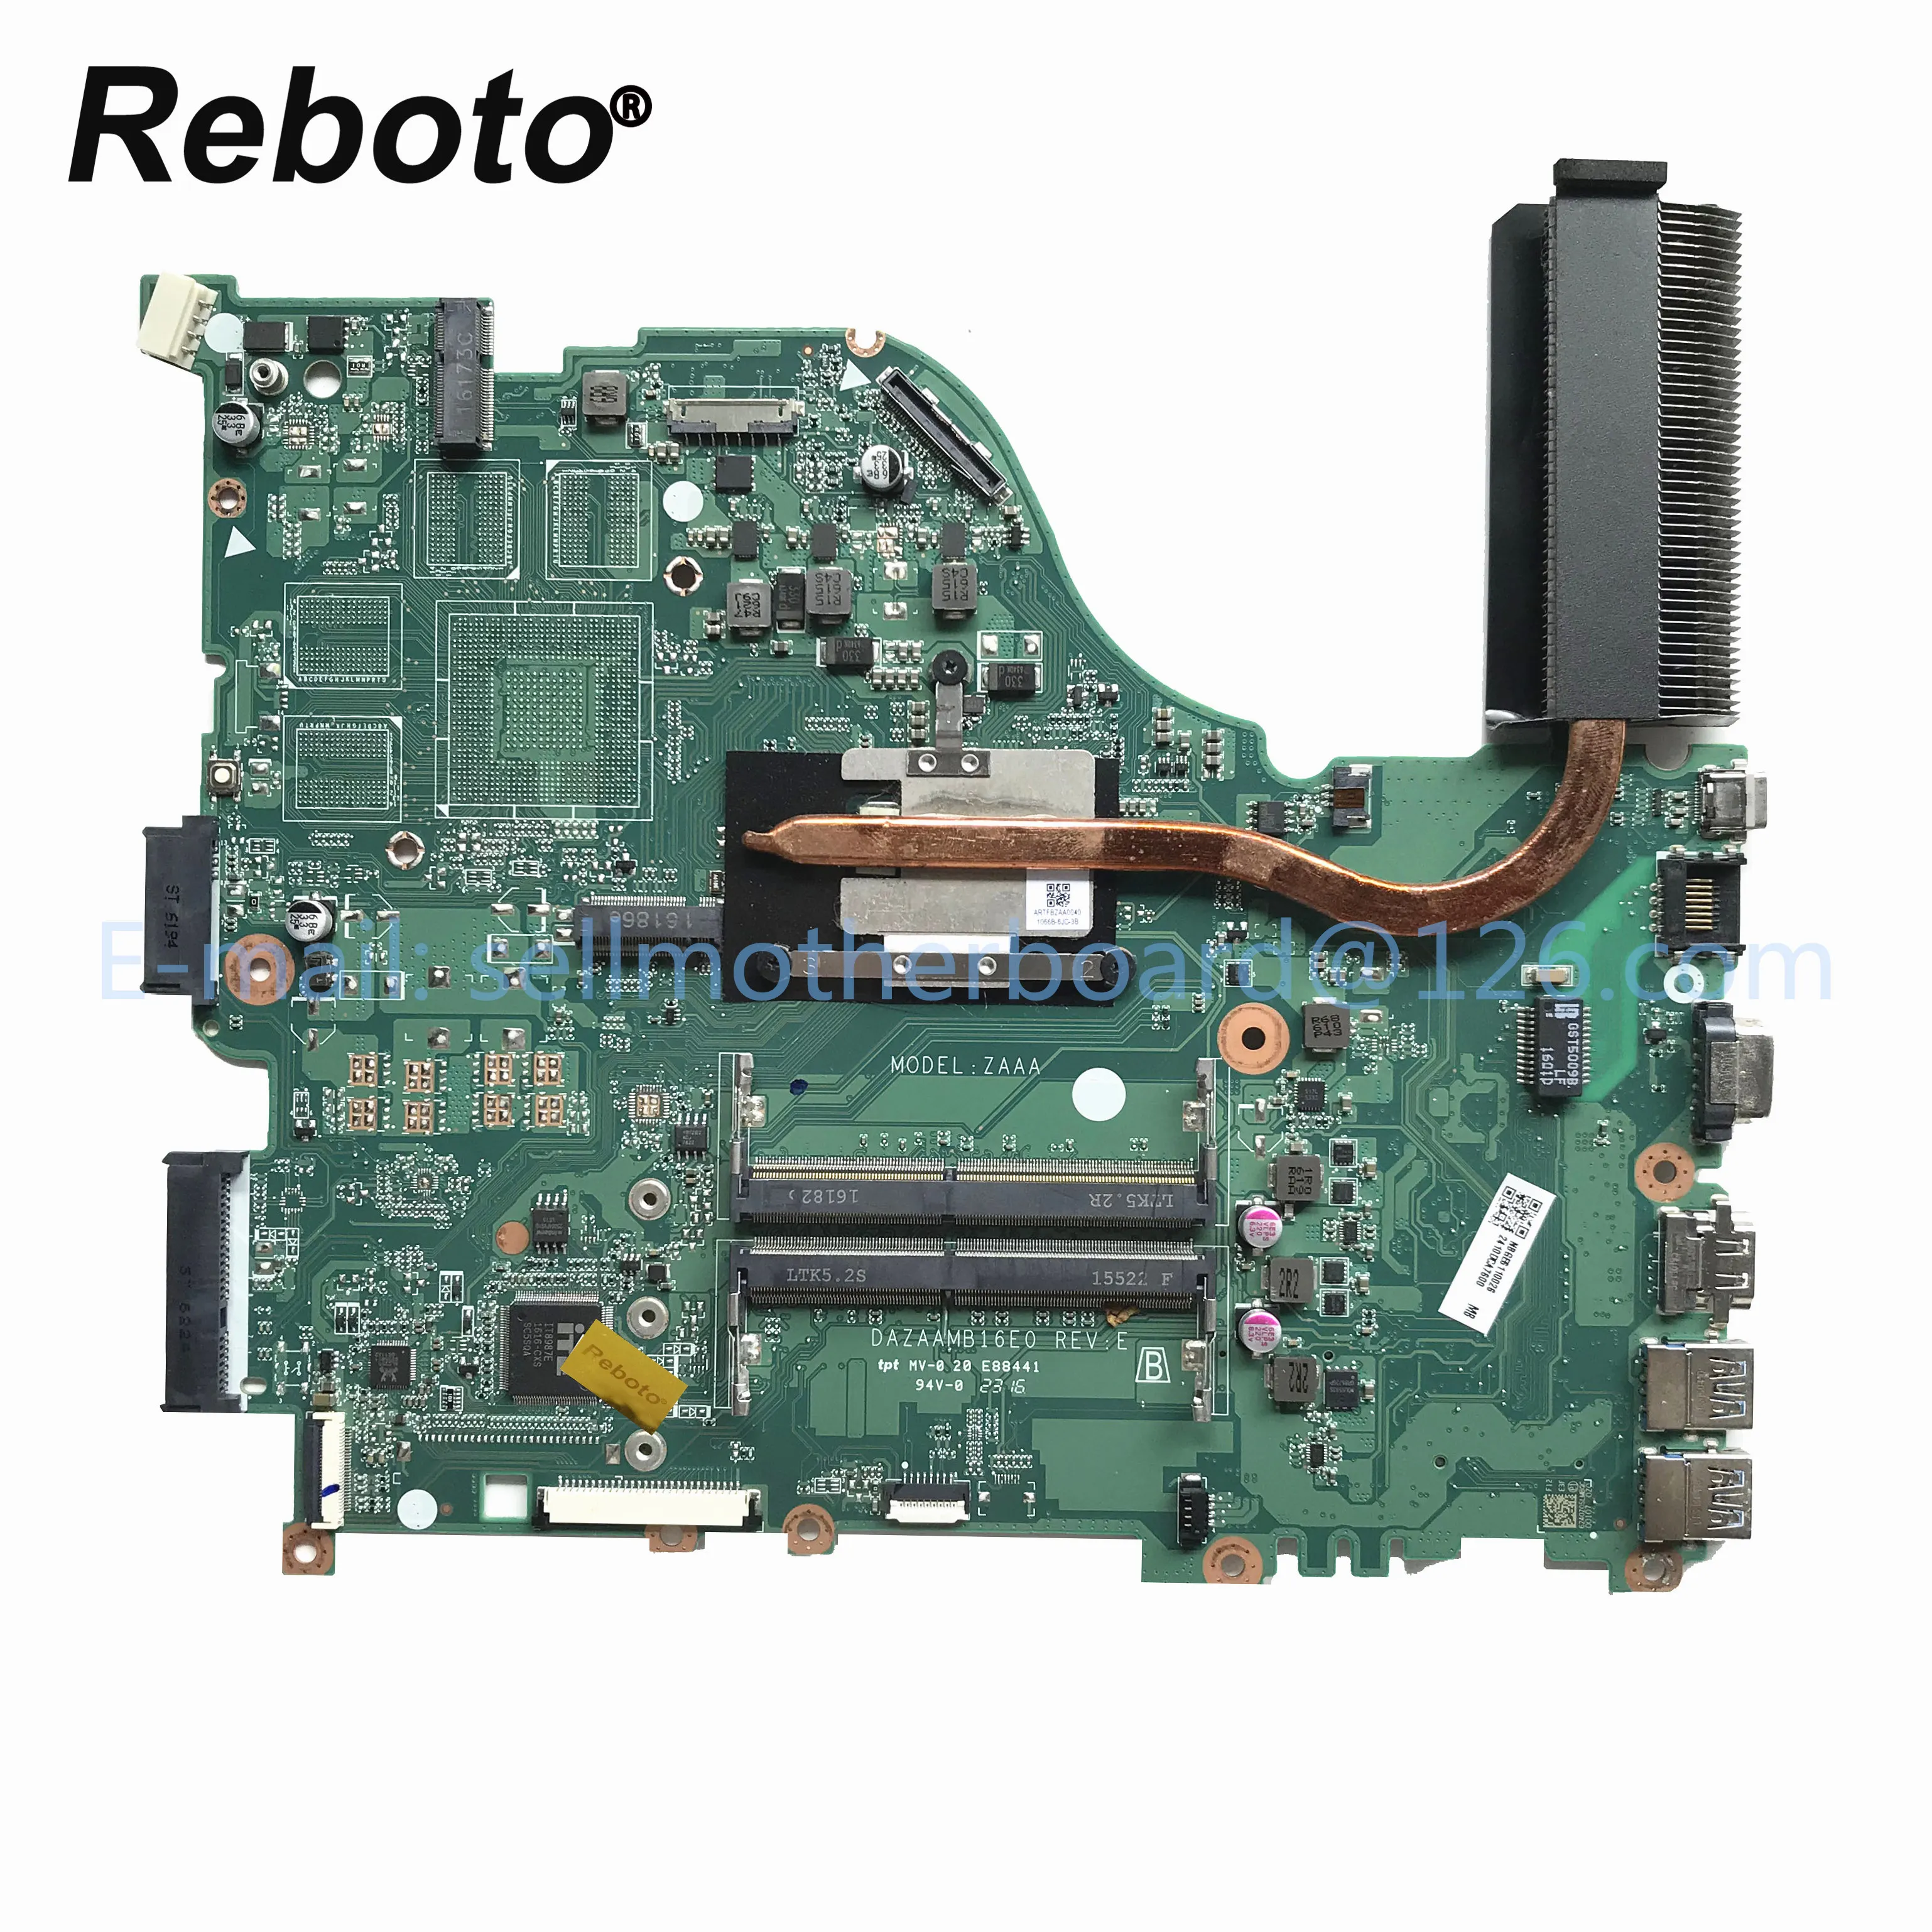 For Acer Aspire E5 575 Laptop Motherboard With I5 60u Cpu And Radiator Dazaamb16e0 Rev E Ddr4 Mainboard 100 Tested Fast Ship Buy E5 575 Motherboard Dazaamb16e0 Product On Alibaba Com